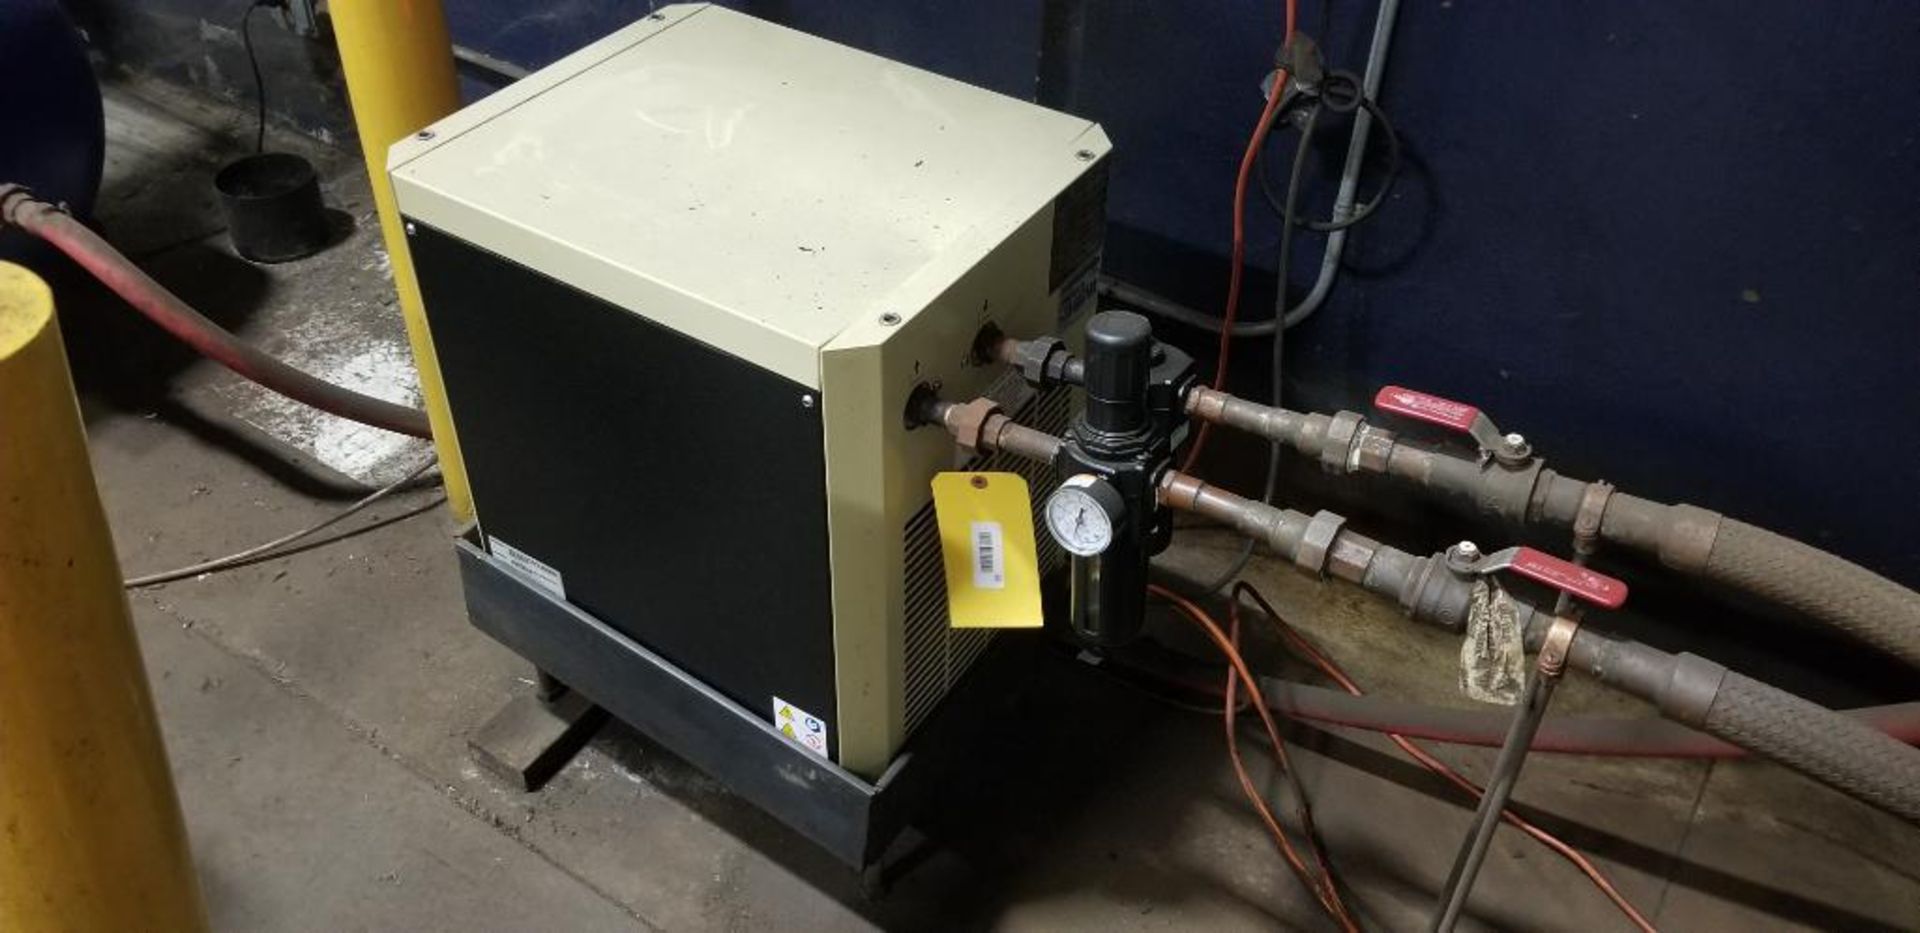 Ingersoll Rand Compressed Air Dryer, Model D108IN, 115v, Single Phase ($25 Loading Fee Will be Added